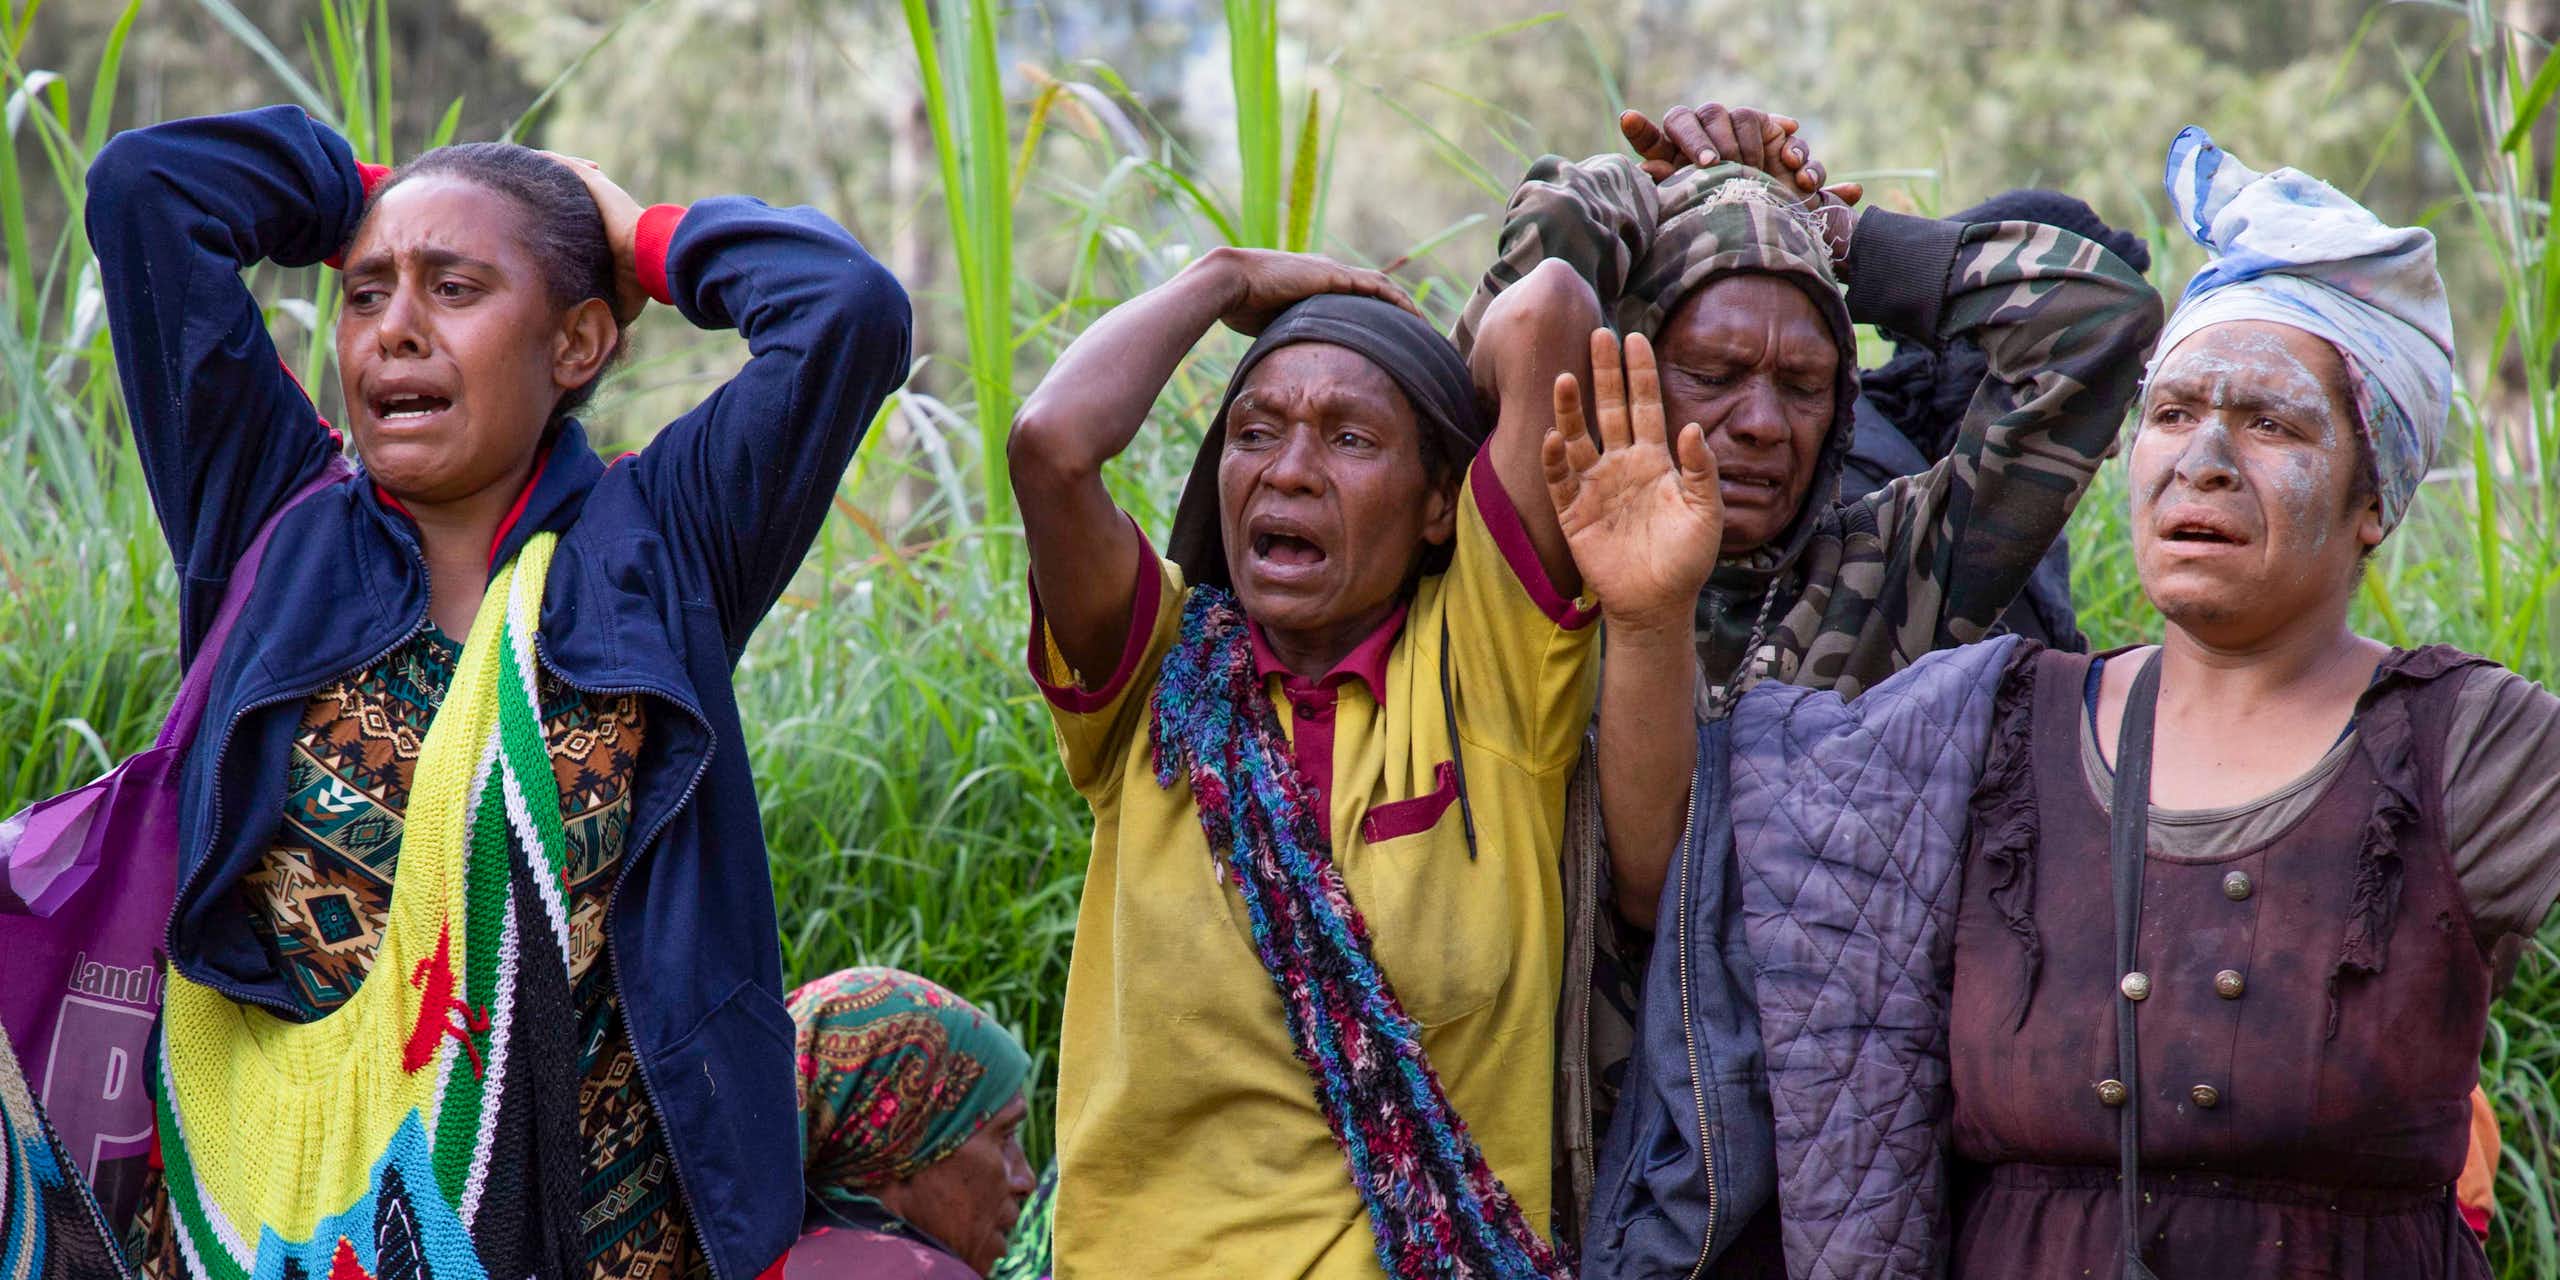 Is Australia doing enough to respond to Papua New Guinea’s catastrophic landslide?